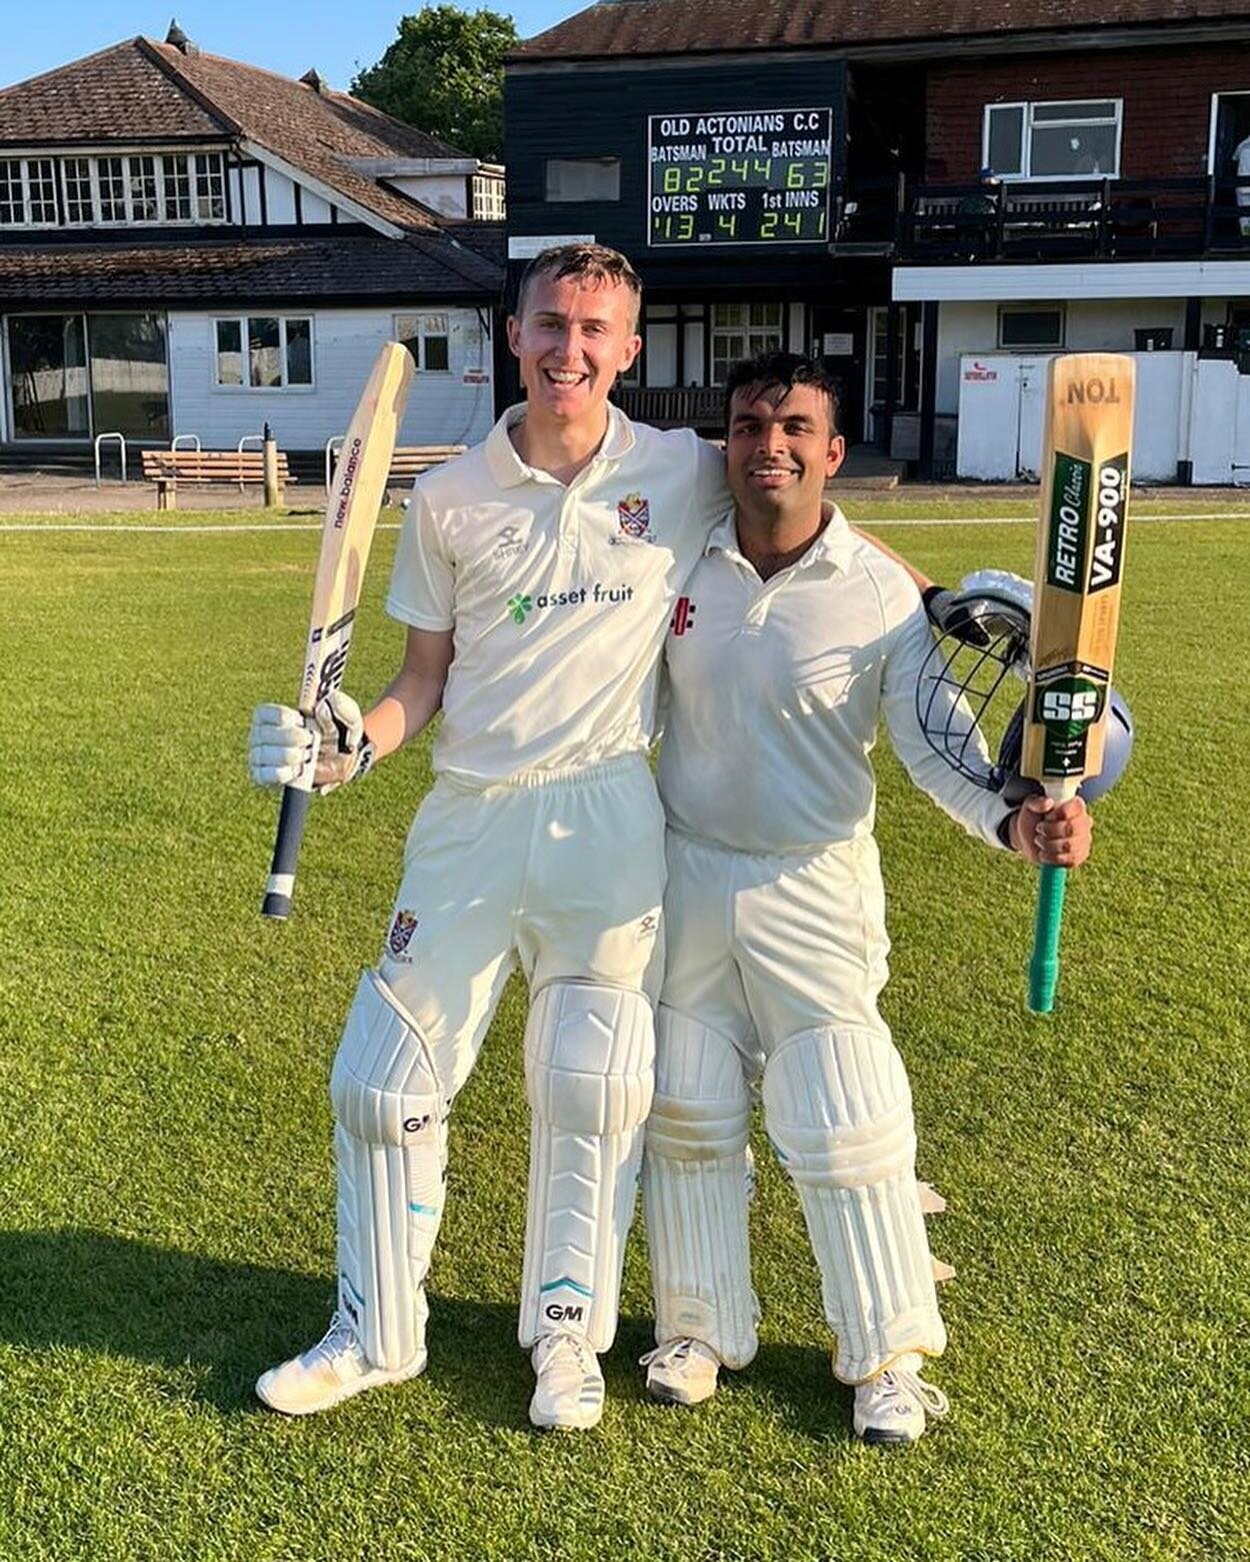 A 50 from men's 1s skip Dominic Haddock made sure Headstone Manor had something to think about, chasing 212. Unfortunately the bowling was not quite tight enough, going down by 4 wickets. 
The 2s, having conceding 241 on the road (and on a road) to e